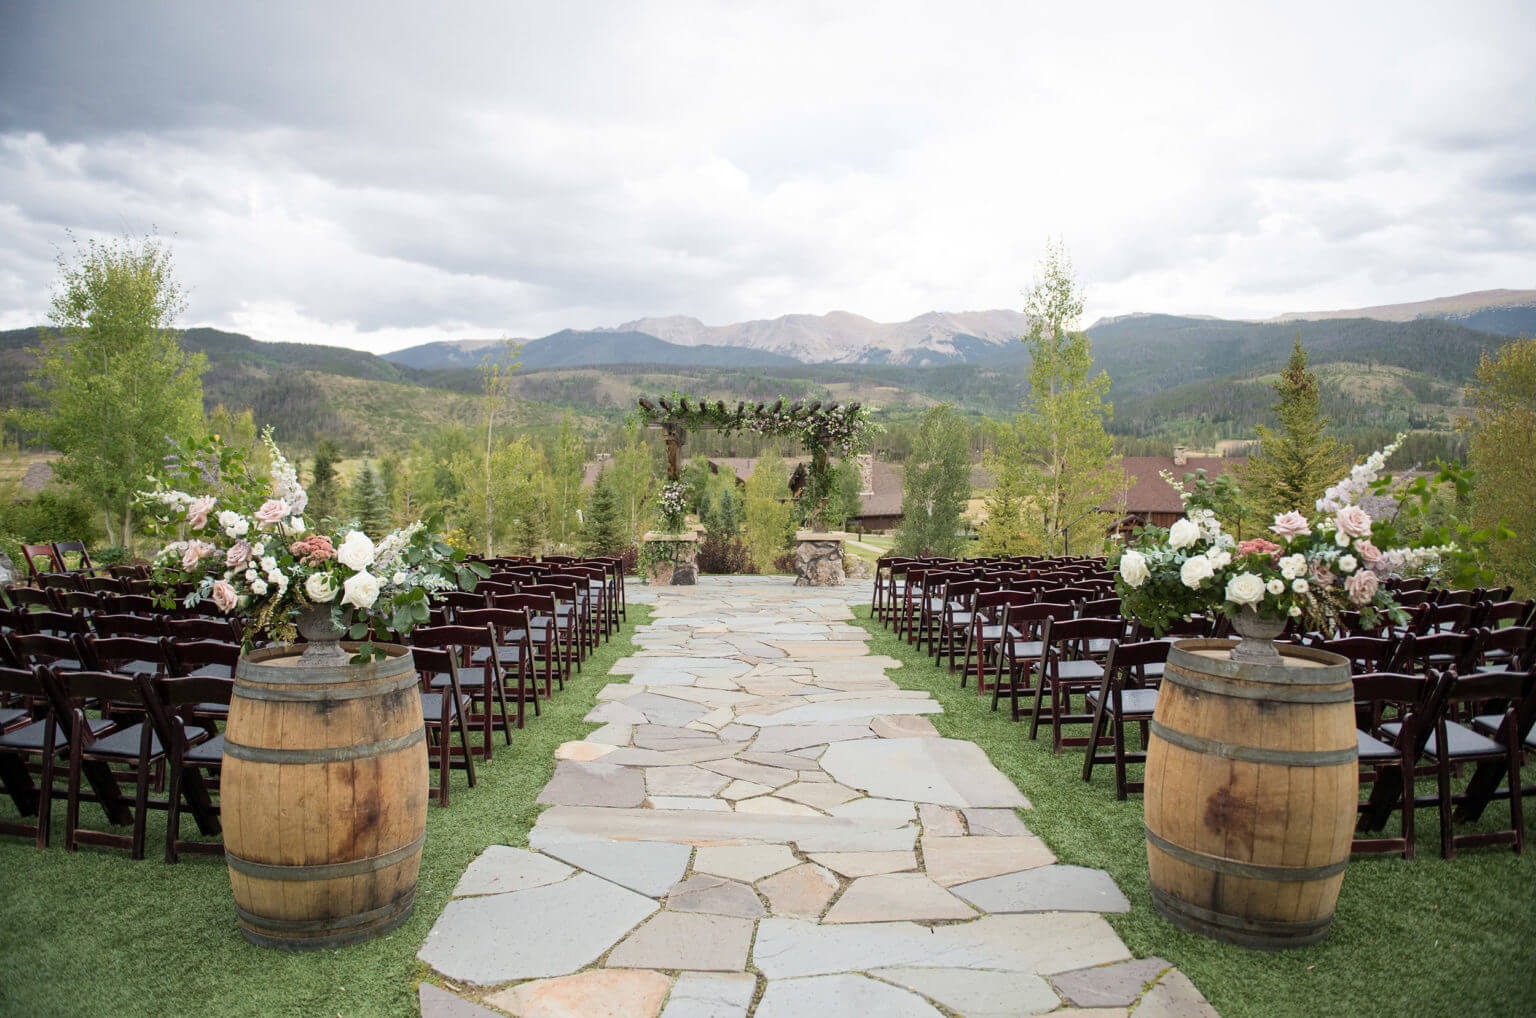 micro wedding venue in colorado set up for a ceremony in the mountains